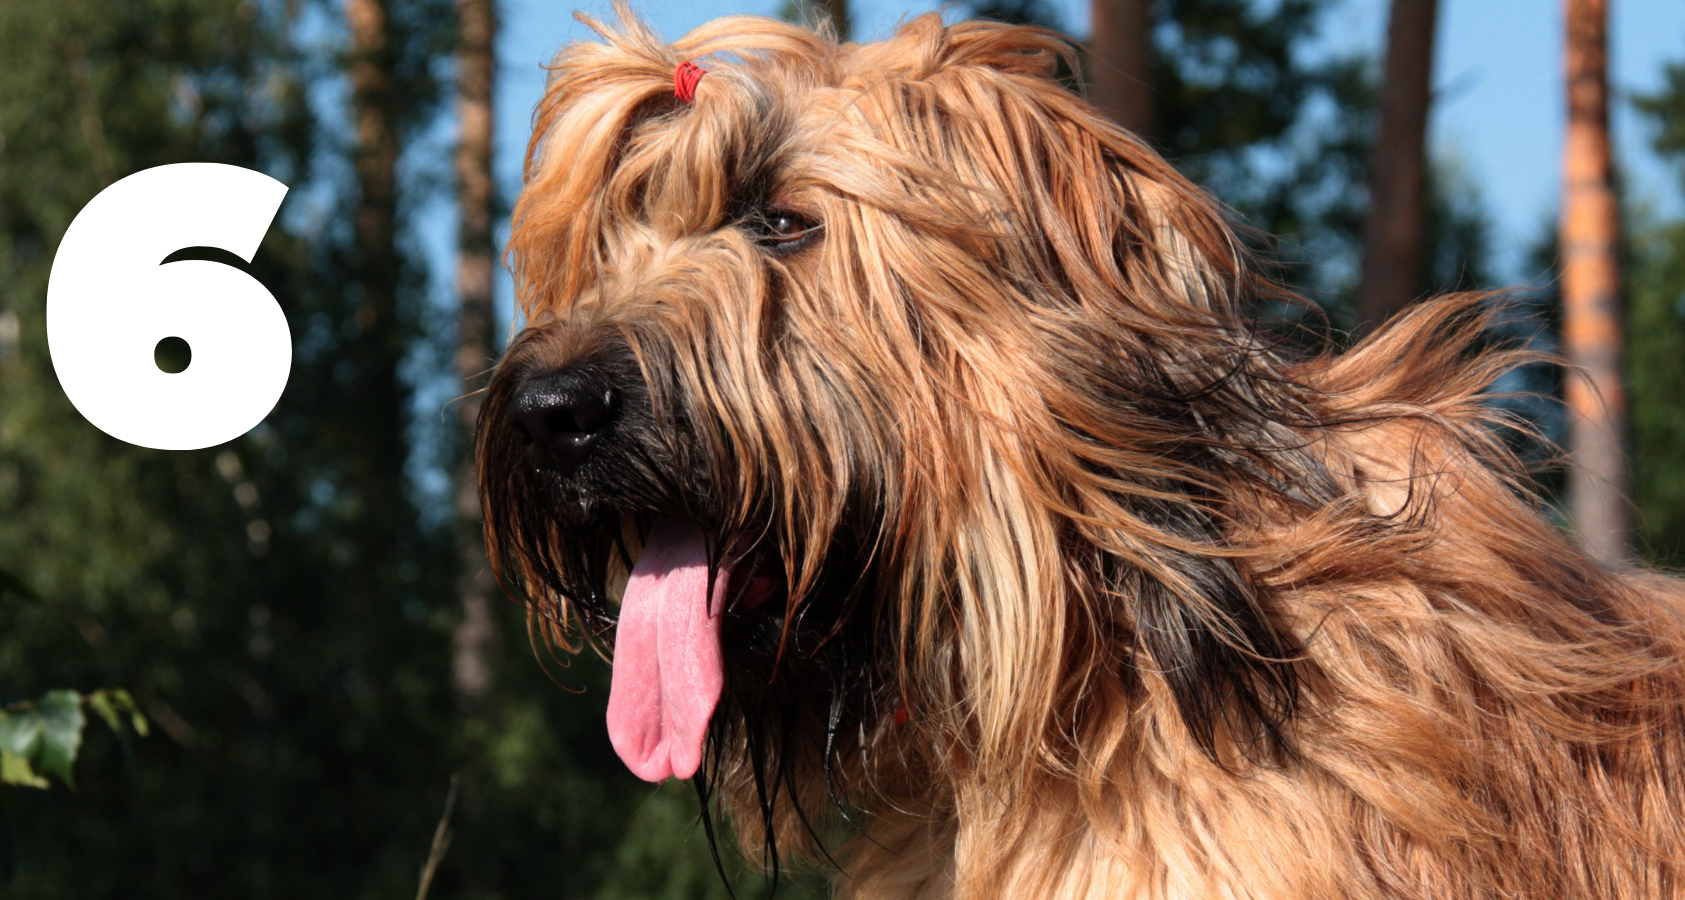 The place for dog breeds, pet adoption and expert pet advice